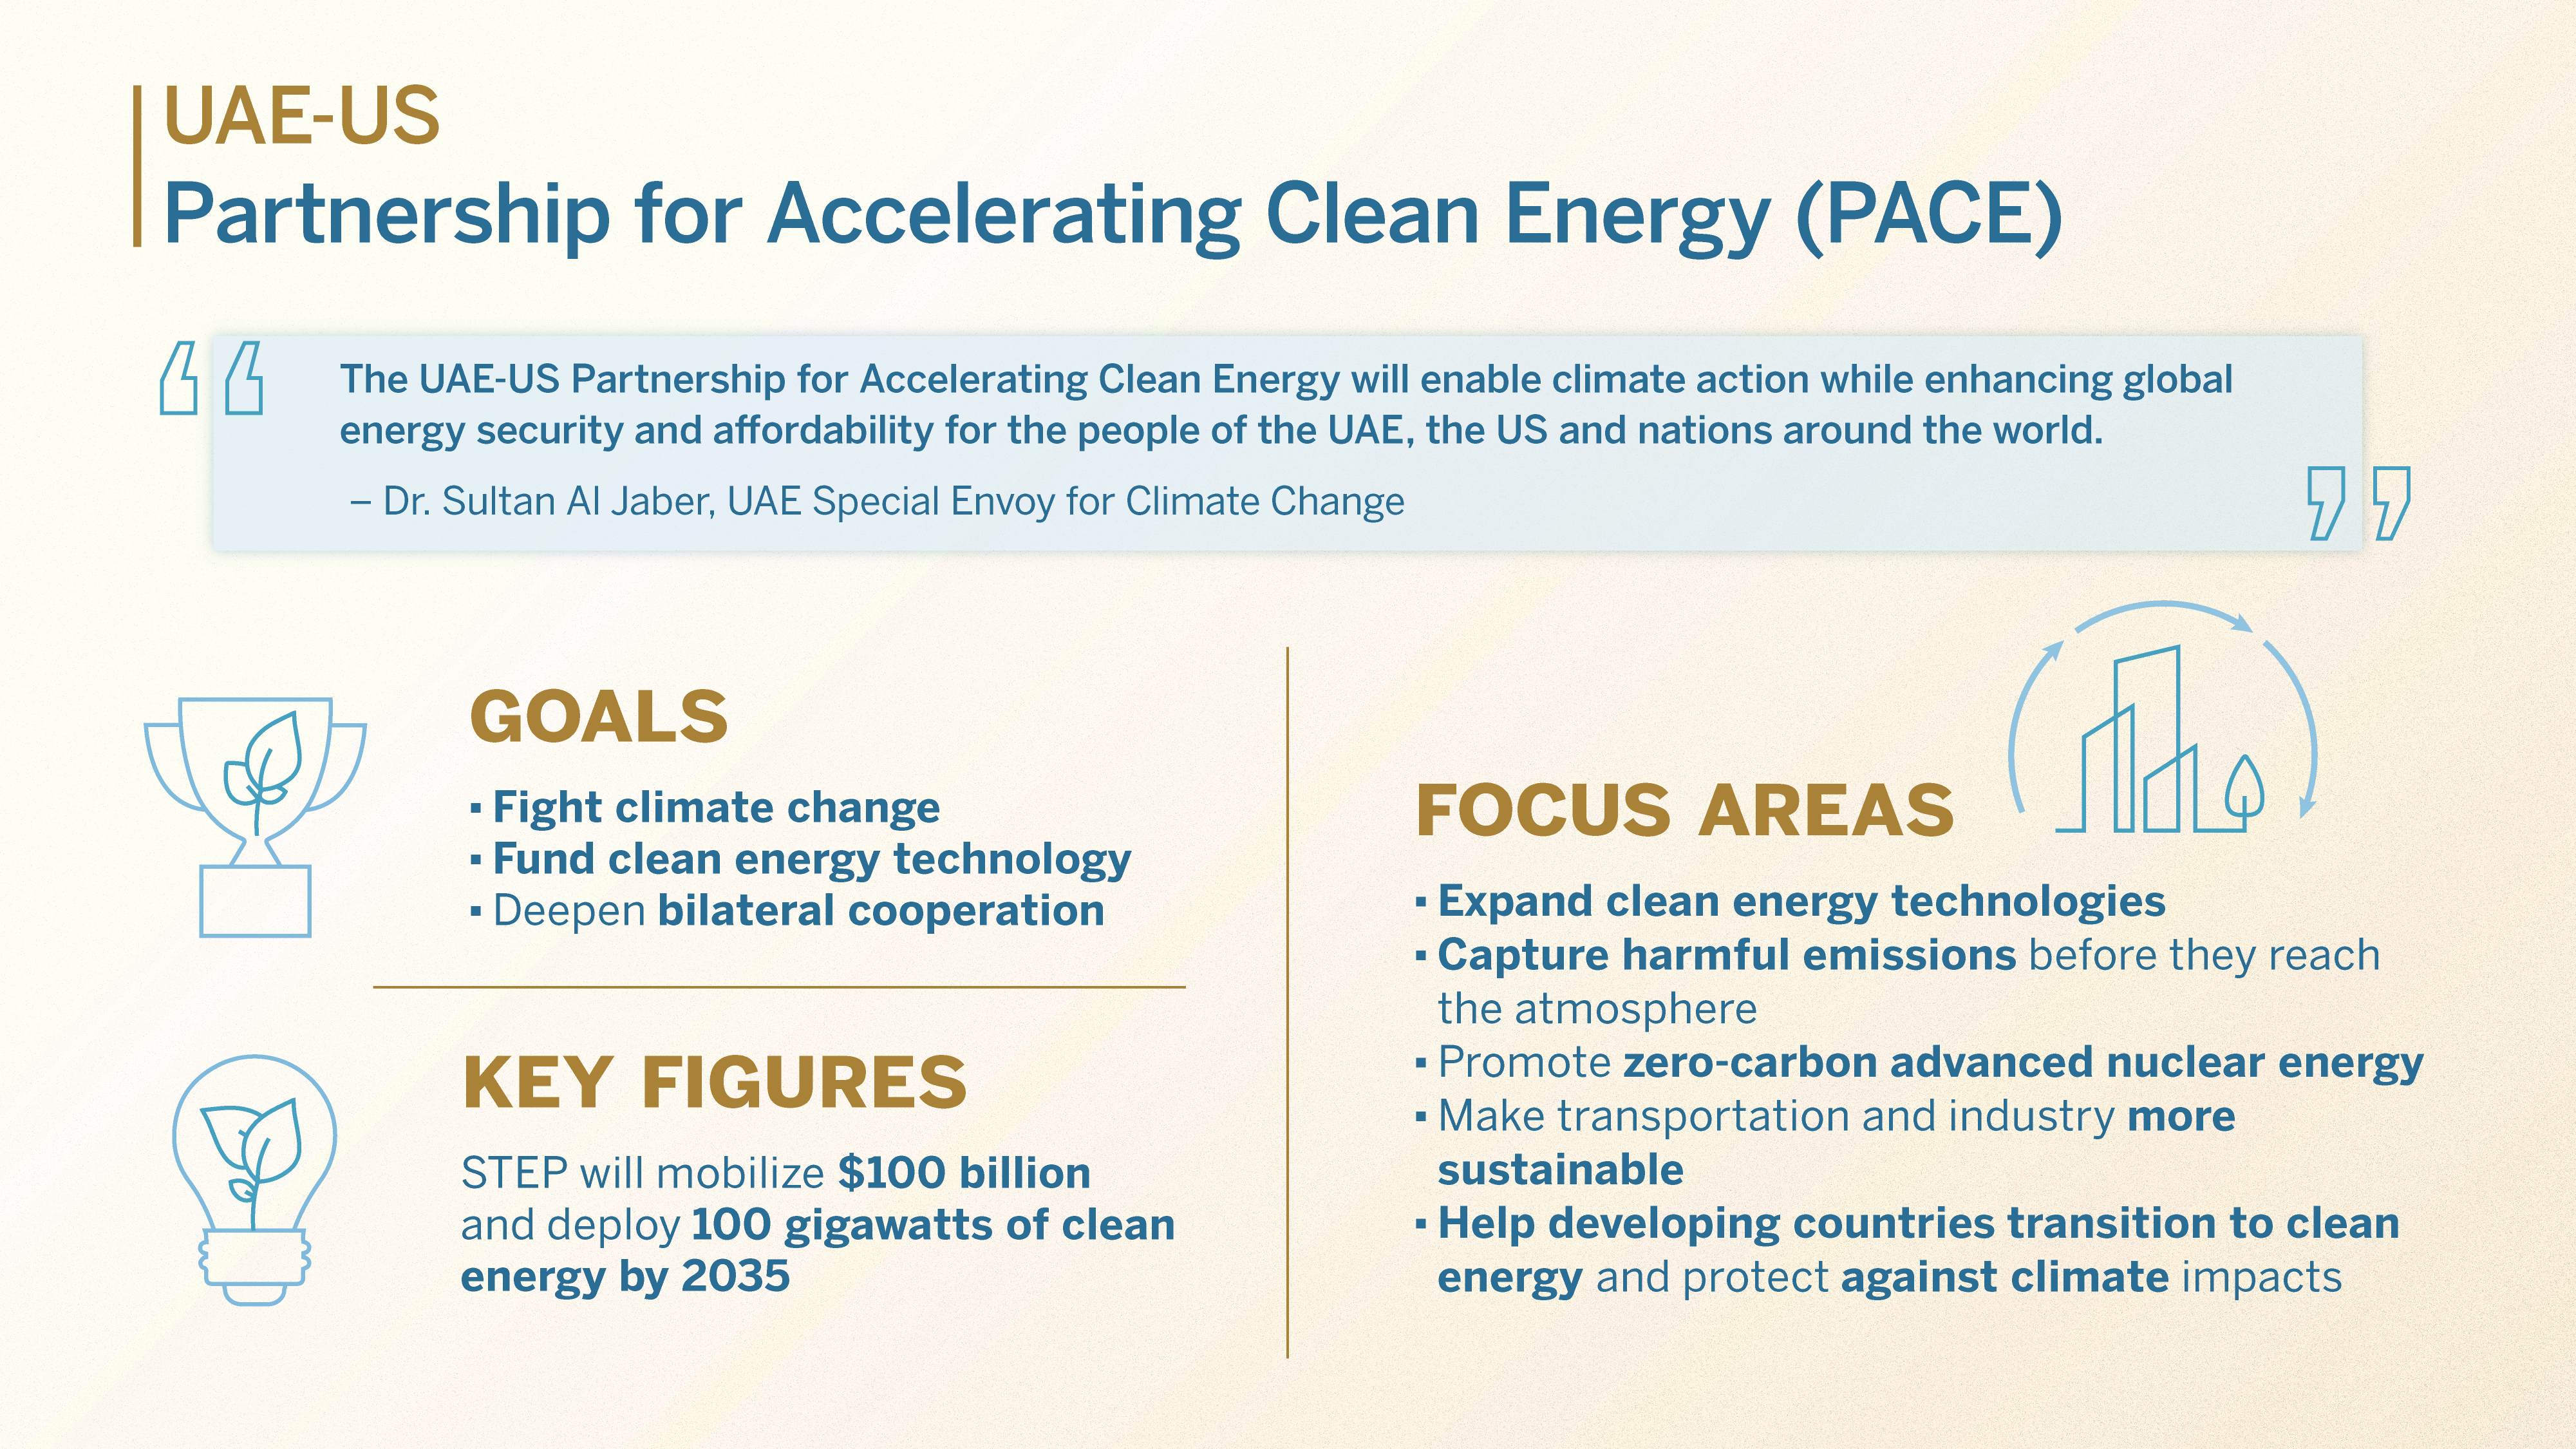 Infographic on the UAE-US Partnership for Accelerating Clean Energy (PACE). Goals: Fight climate change, fund clean energy technology, and deepen bilateral cooperation. Key Figures: STEP will mobilize $100 billion and deploy 100 gigawatts of clean energy by 2035. Focus Areas: Expand clean energy technologies, capture harmful emissions before they reach the atmosphere, promote zero-carbon advanced nuclear energy, make transportation and industry more sustainable